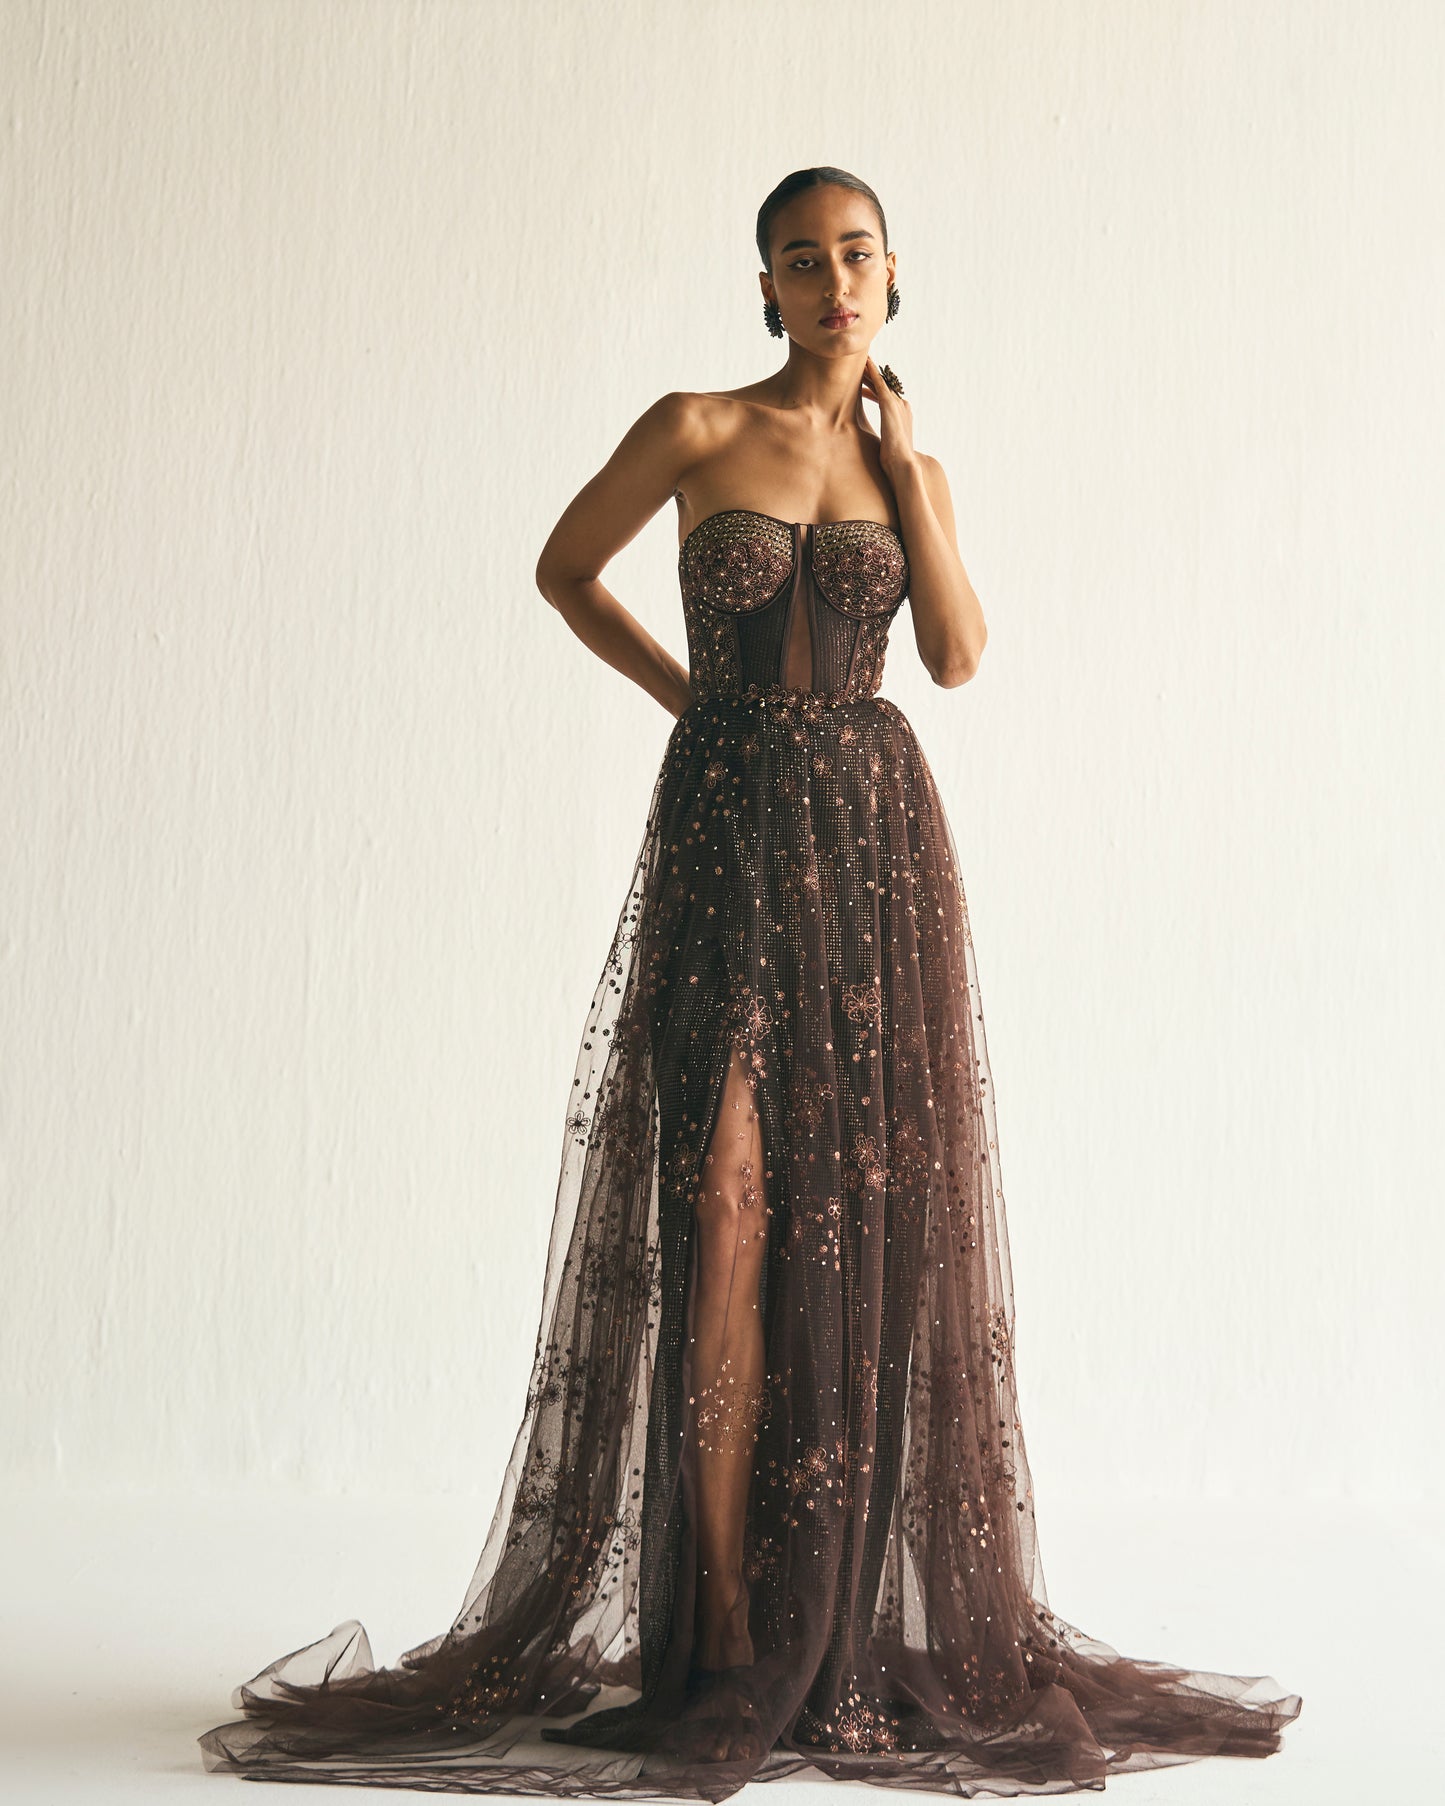 Cosmic brown embroidered tulle gown